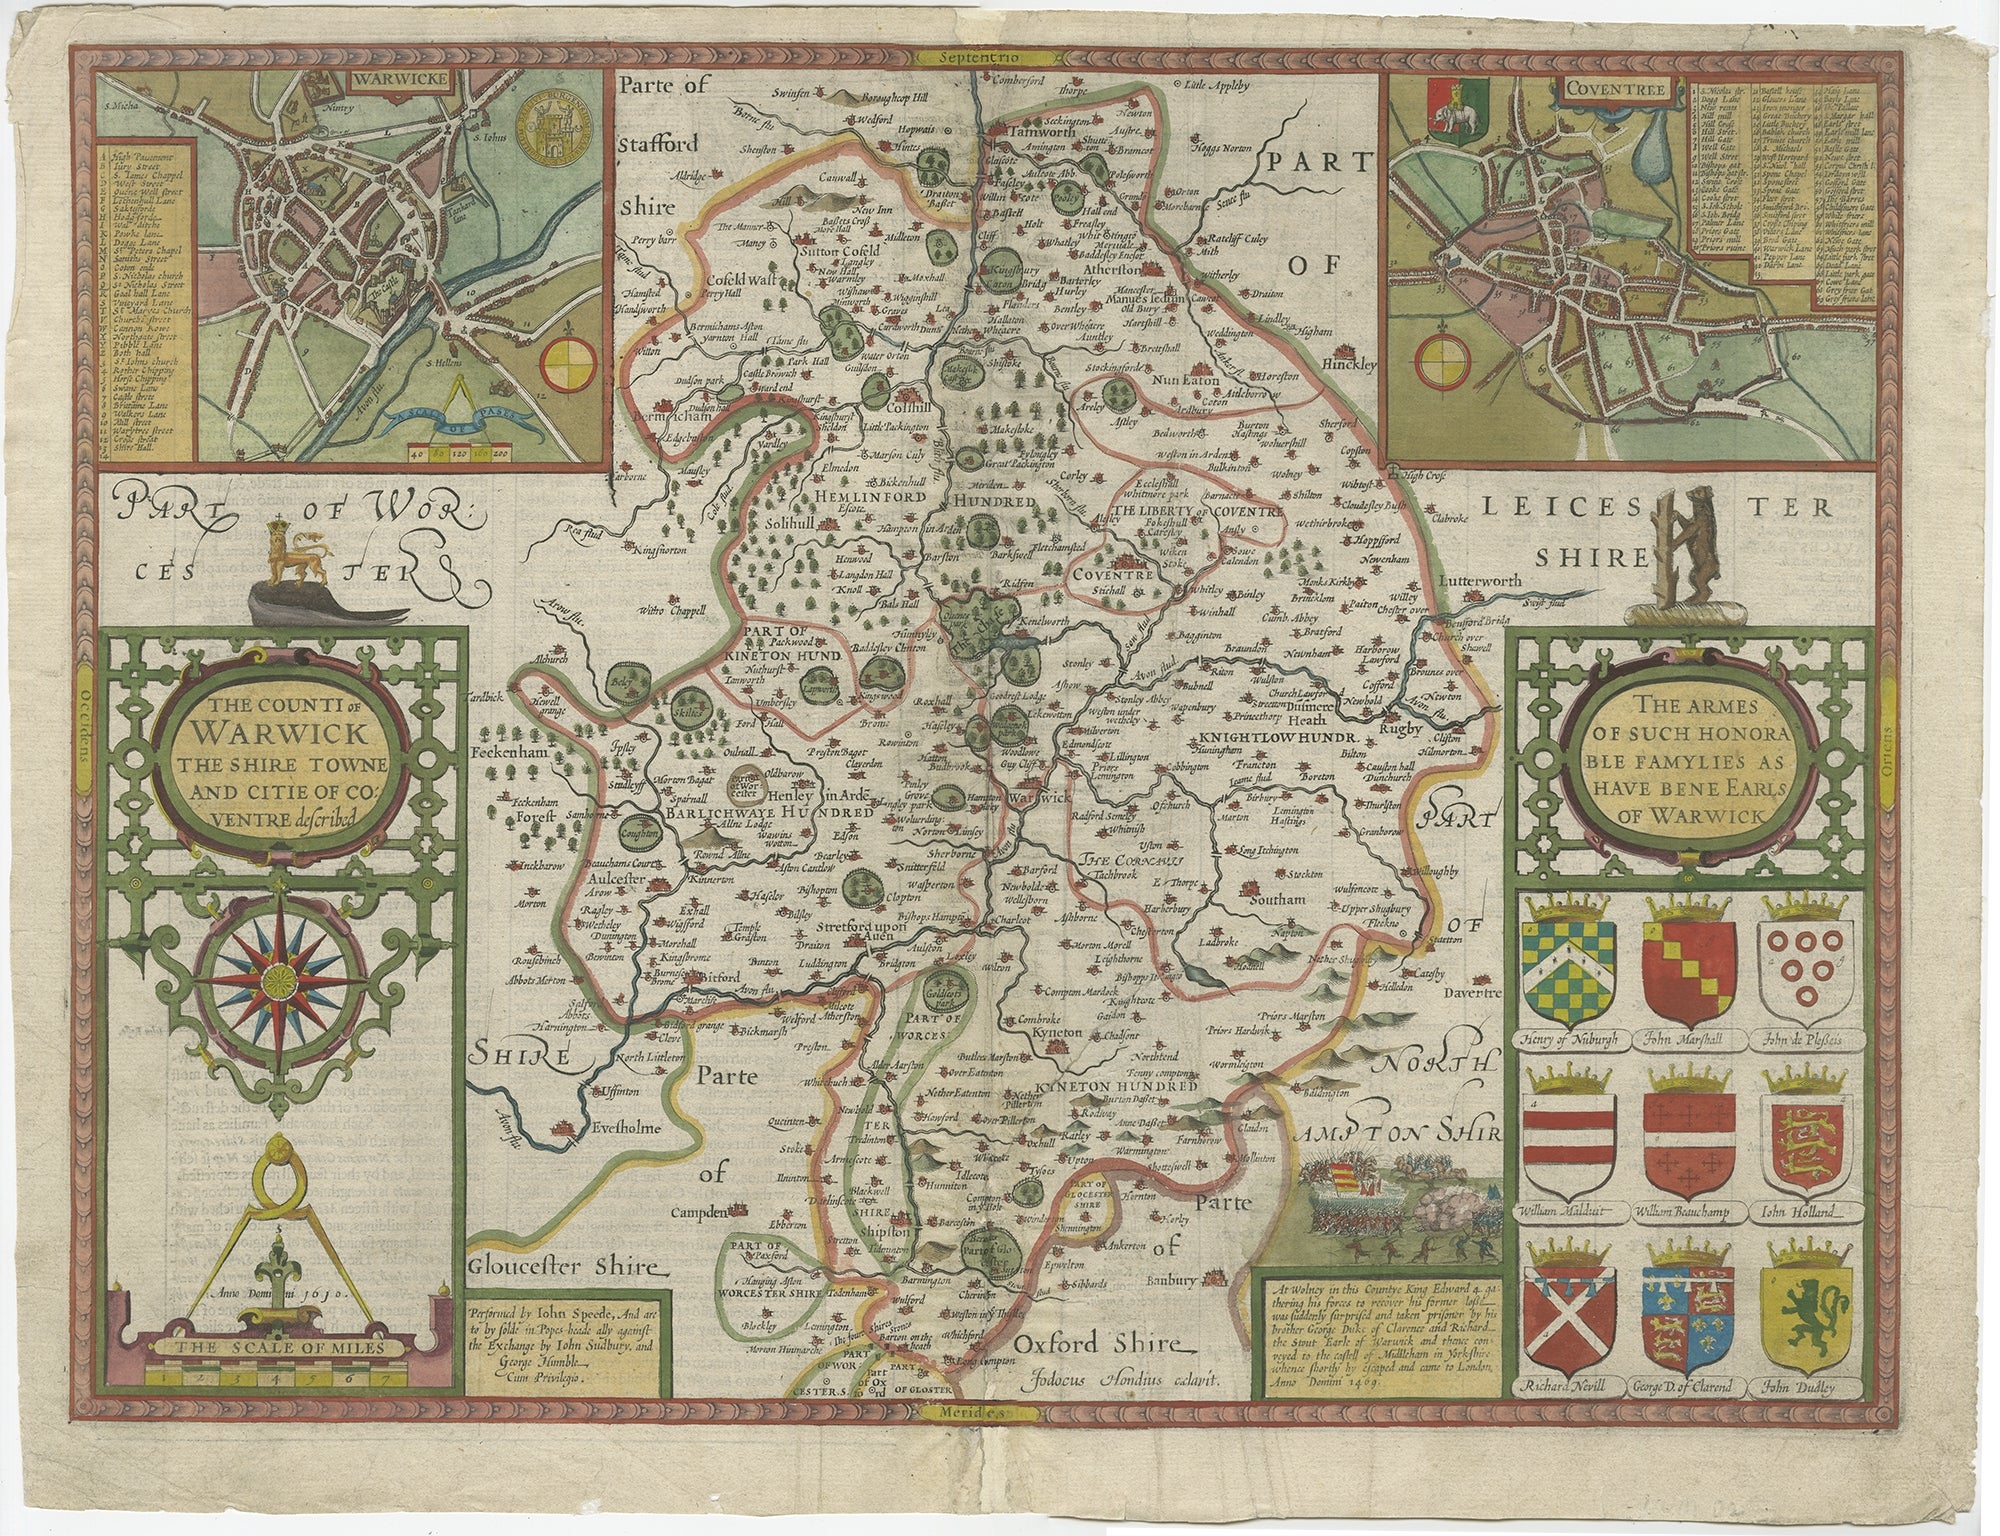 Antique map titled 'The Counti of Warwick the Shire Towne and Citie of Coventre described'. Map of Warwickshire, England. Includes inset town plans of Warwick and Coventry. This map originates from 'Theatre of Great Britaine' by John Speed.

Artists